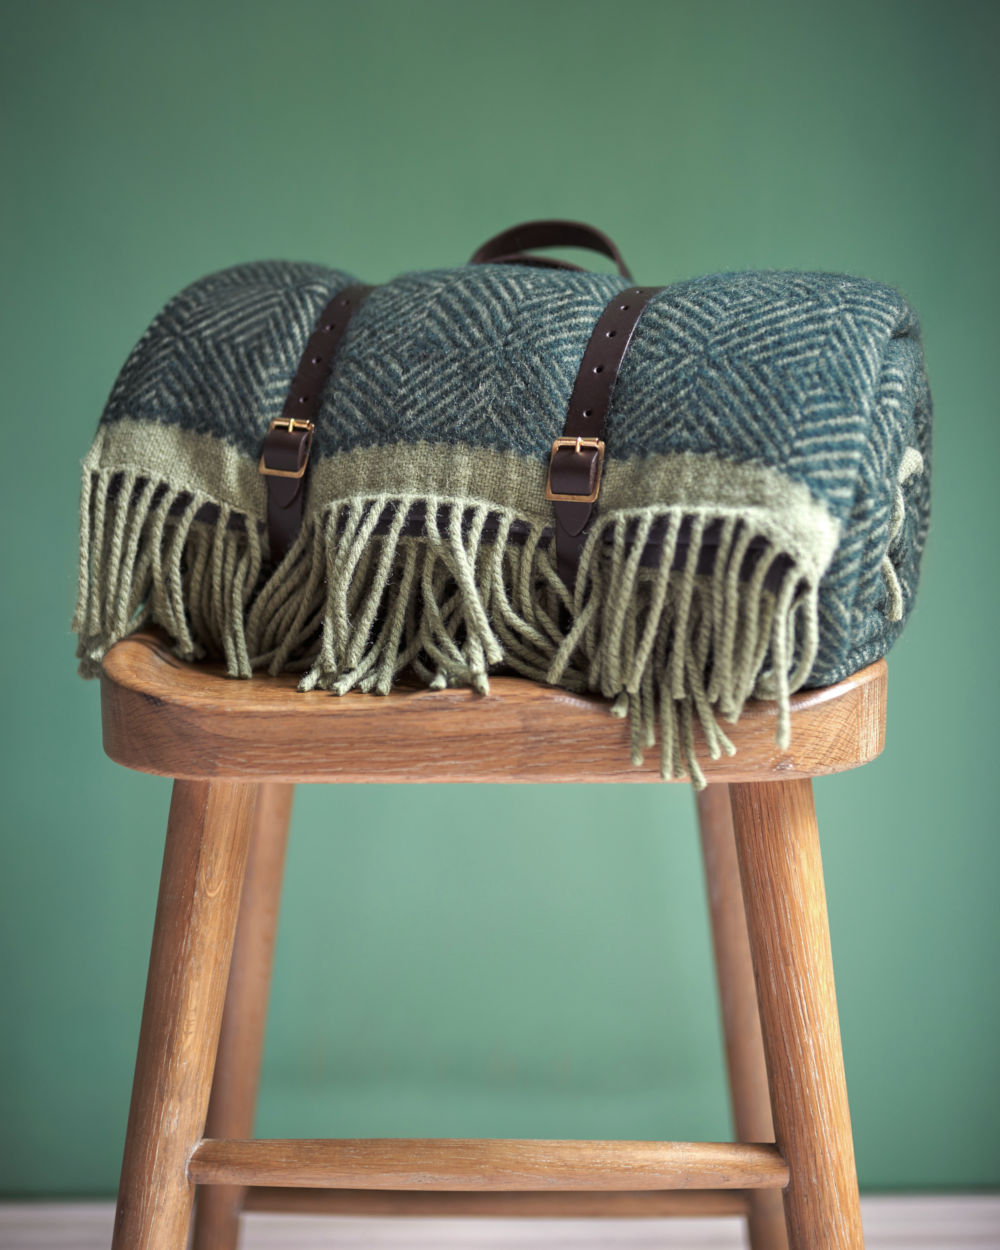 Green wool picnic blanket with leather straps on stool from The British Blanket Company